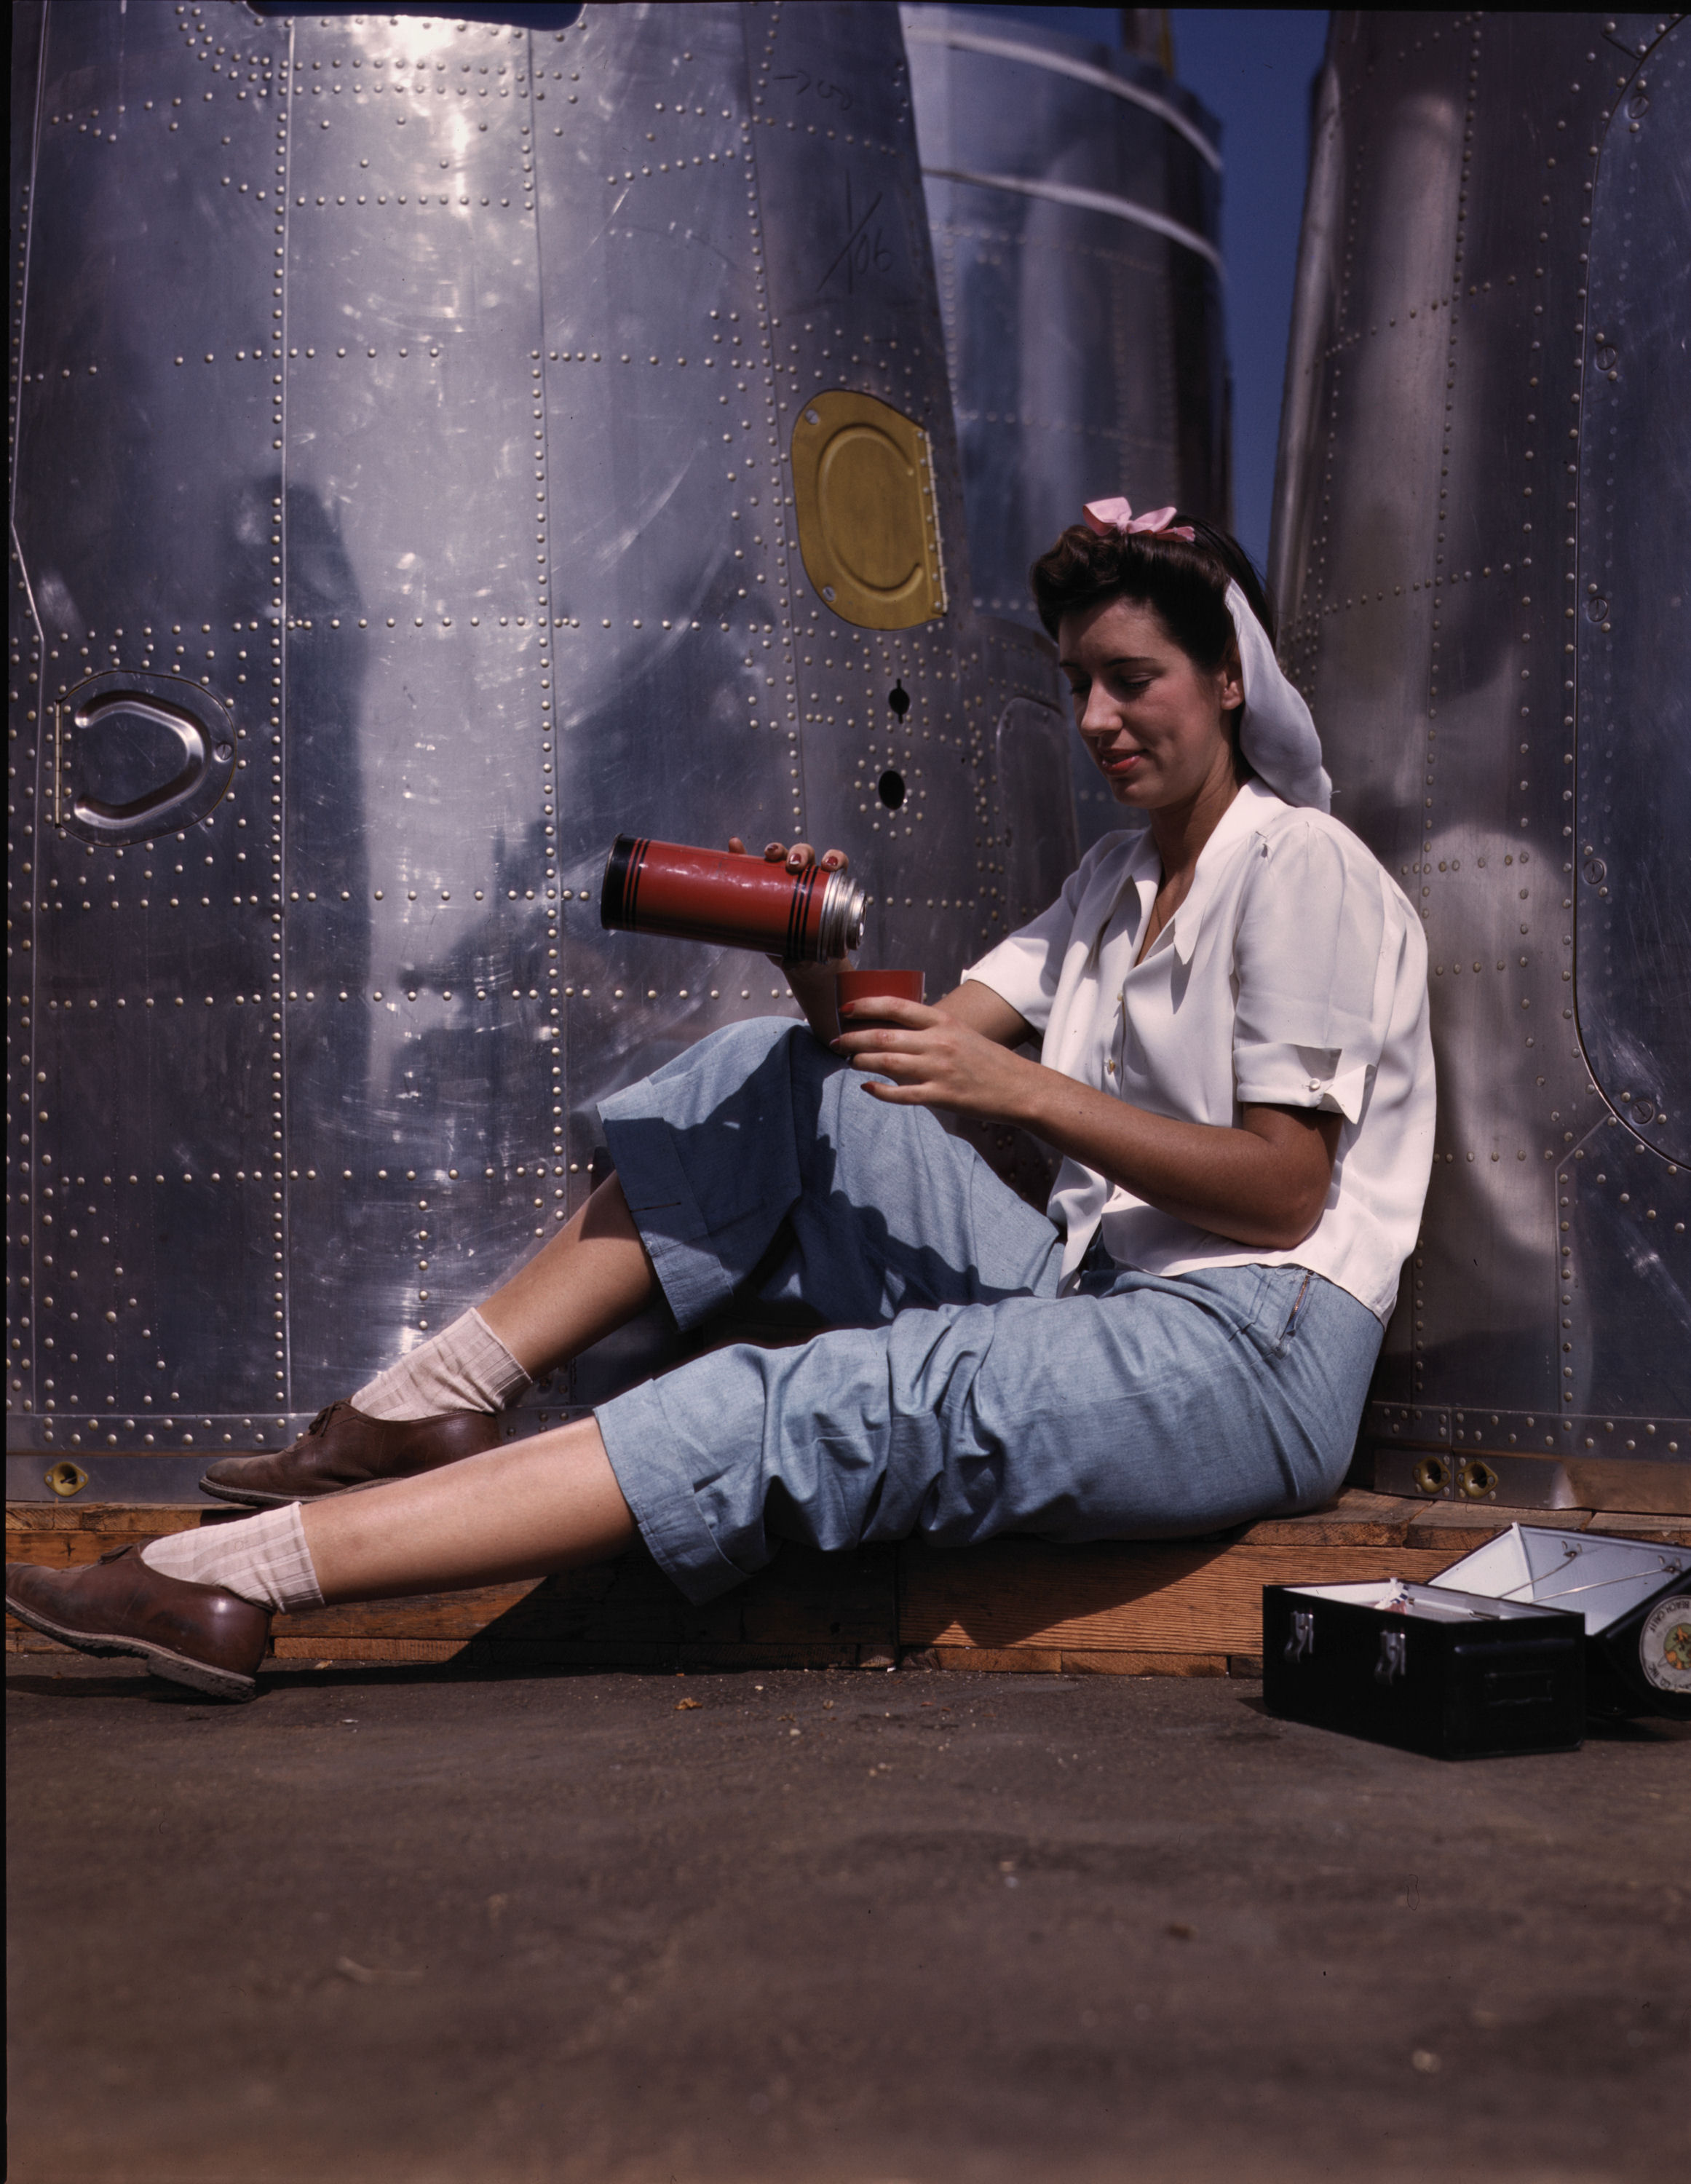 Worker Takes Lunch Break at Douglas Aircraft Company